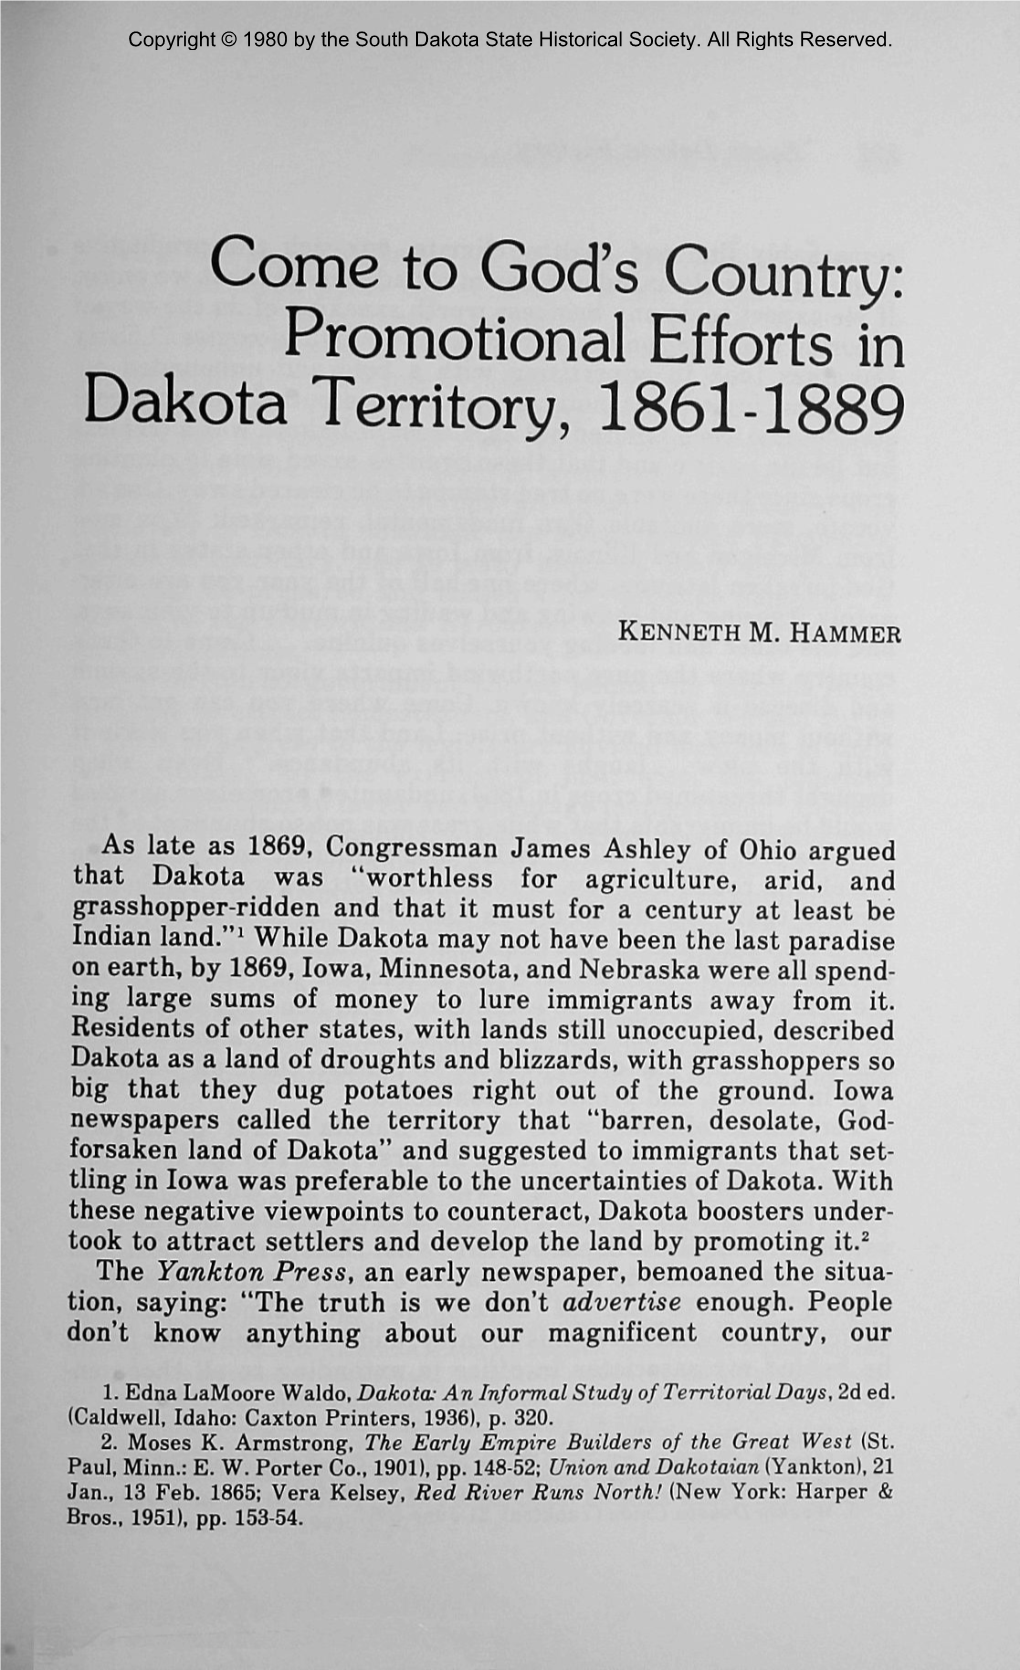 Come to God's Country: Promotional Efforts in Dakota Territory, 1861-1889